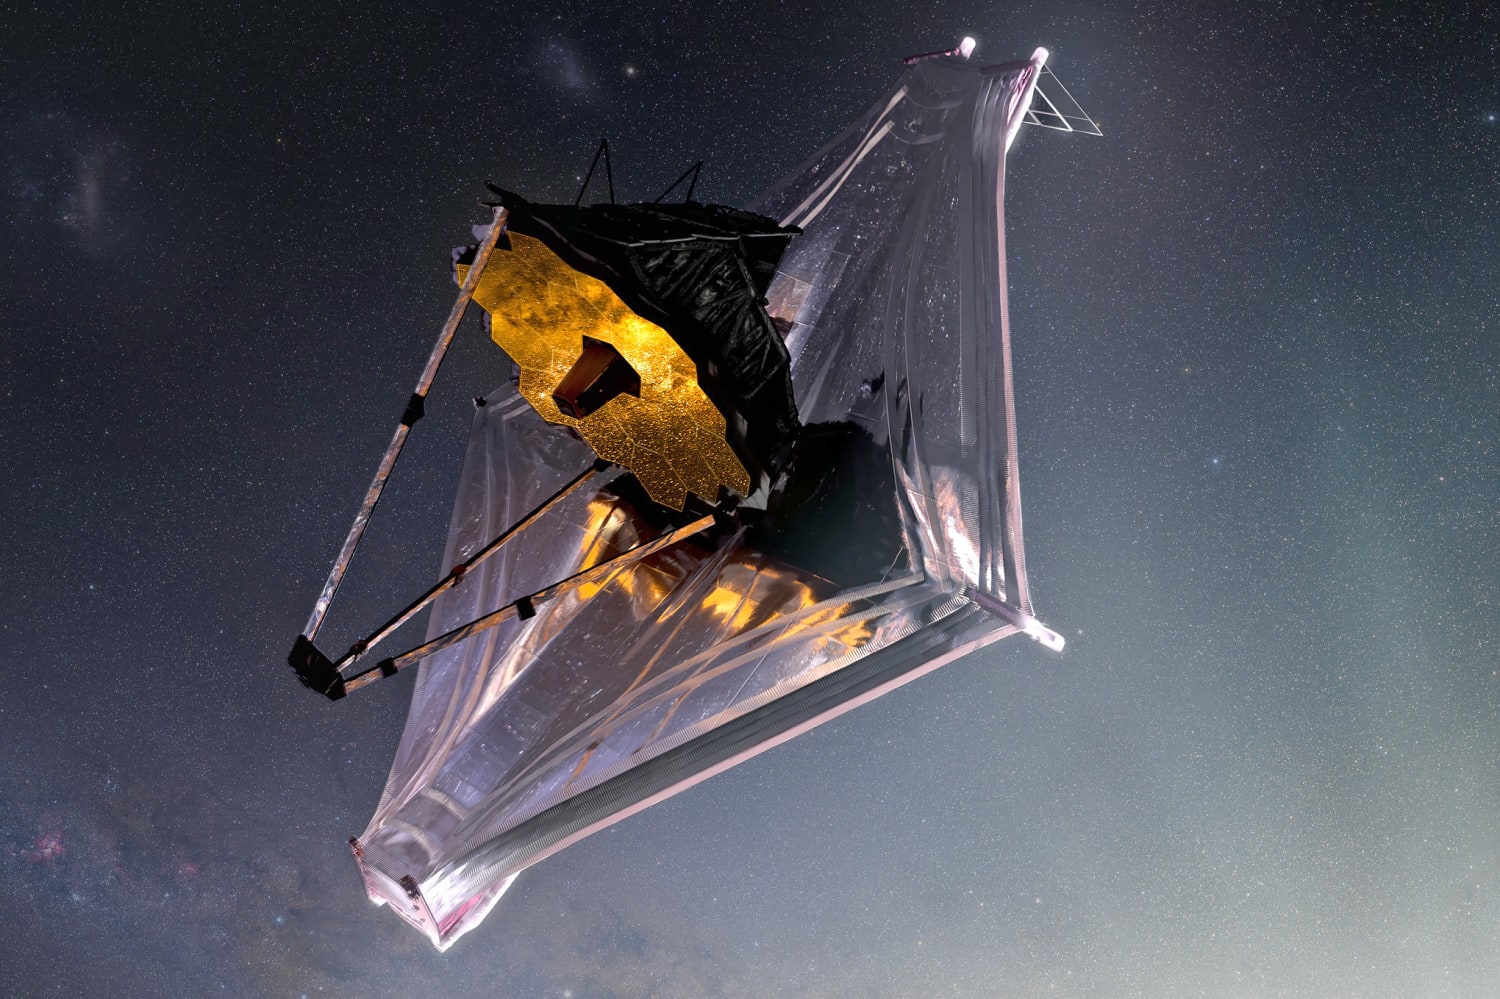 James Webb Telescope Just Announced First Ever, Real Image Of Another World